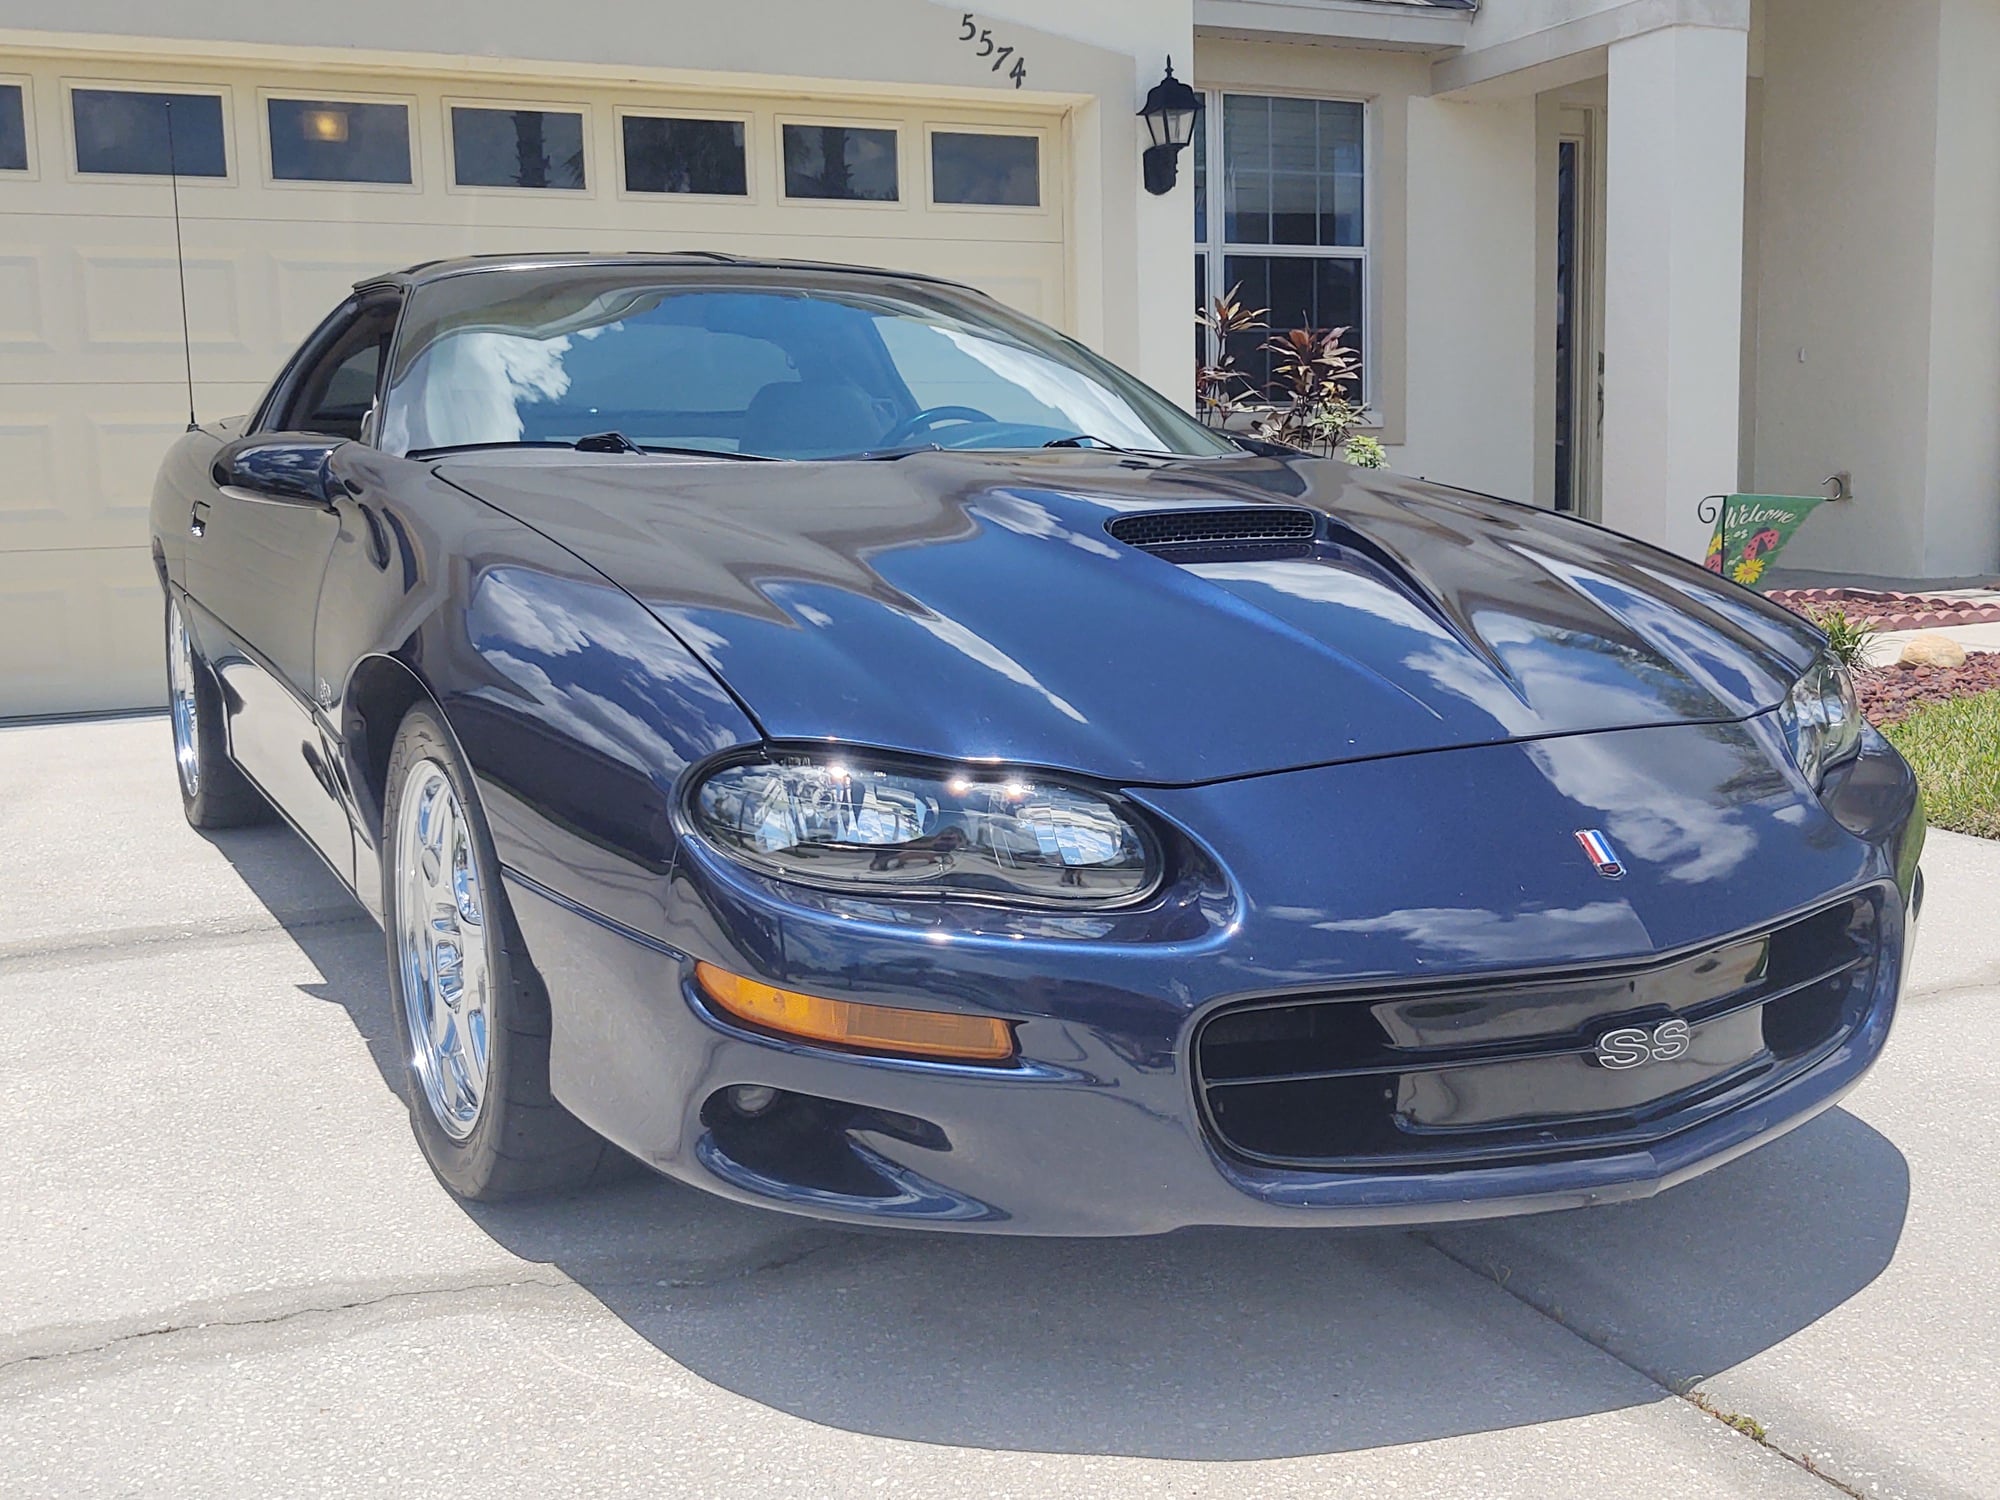 1999 Chevrolet Camaro - Built 1999 Camaro SS 6-speed - Used - VIN 2G1FP22G9X2134843 - 58,000 Miles - 8 cyl - 2WD - Manual - Coupe - Blue - Lakeland, FL 33805, United States